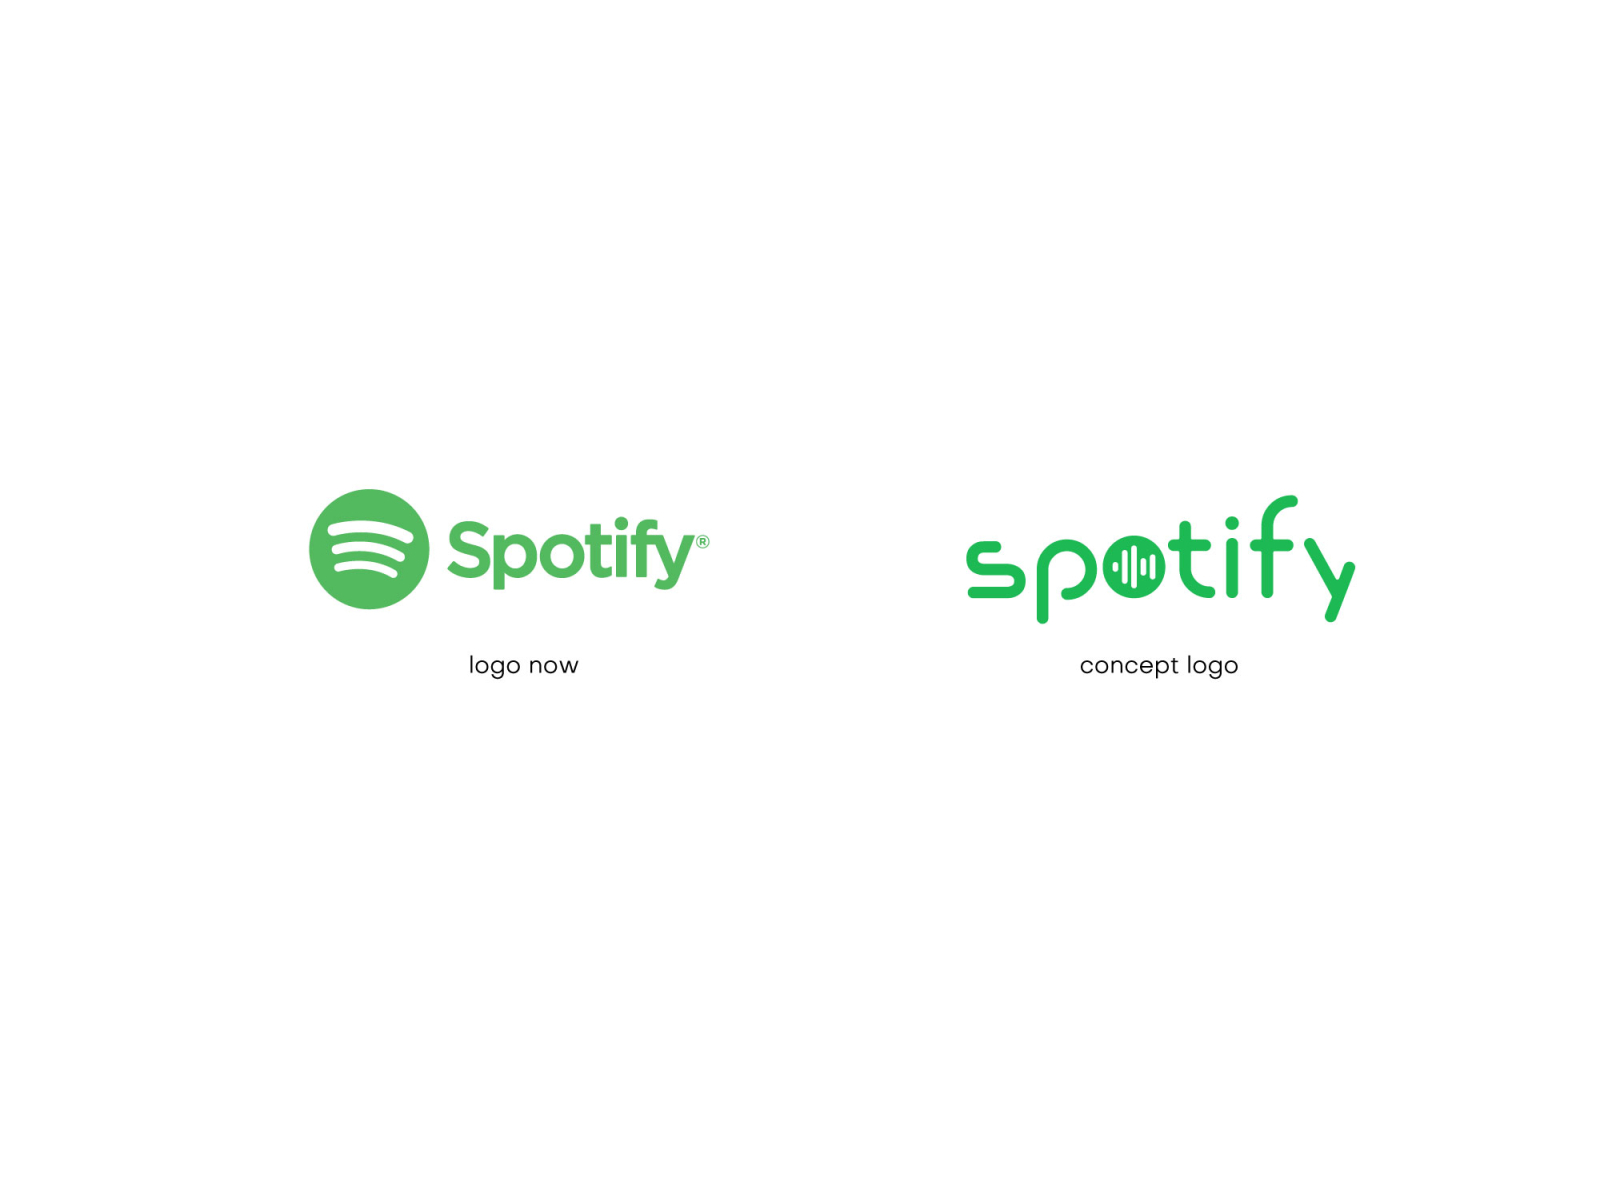 spotify logo by Charles Santos on Dribbble